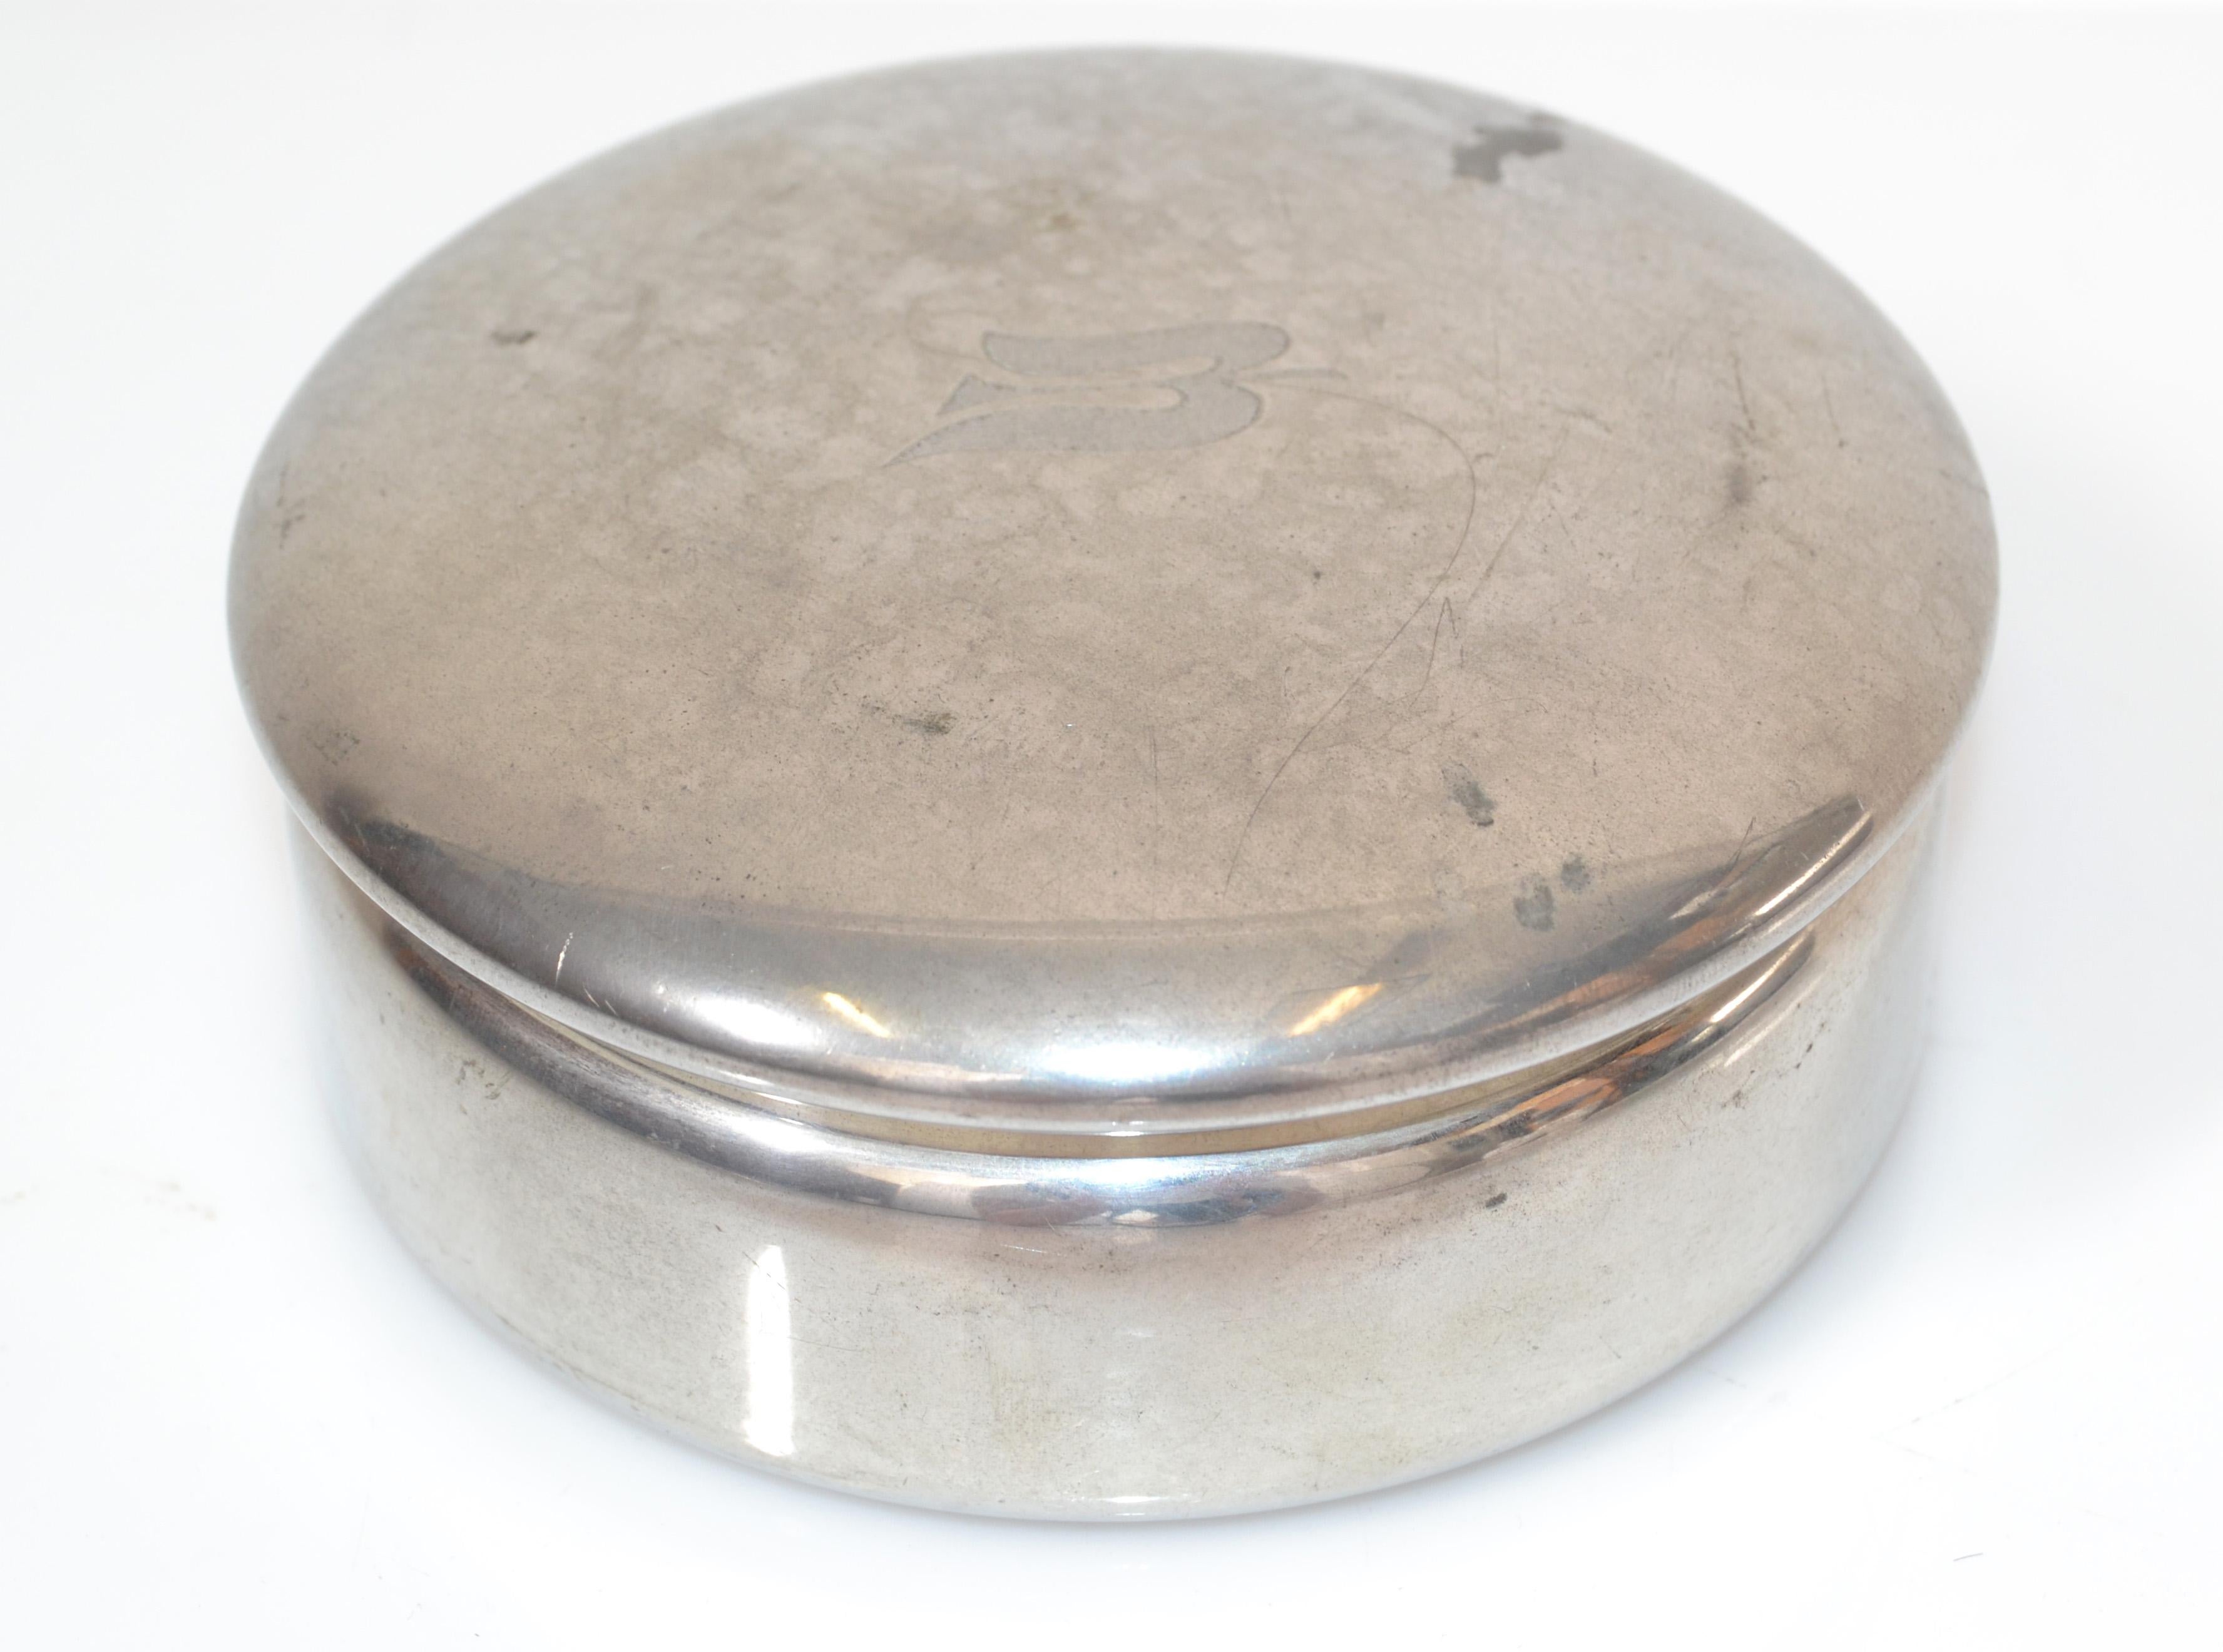 Scandinavian Modern silver color Jewelry decorative covered box, Trinket, Keepsake by Empire Pewter 701.
Inside is laid out with royal blue velvet and suits perfectly for Rings to keep.
This lidded box was made for the Royal Viking Sky Skald